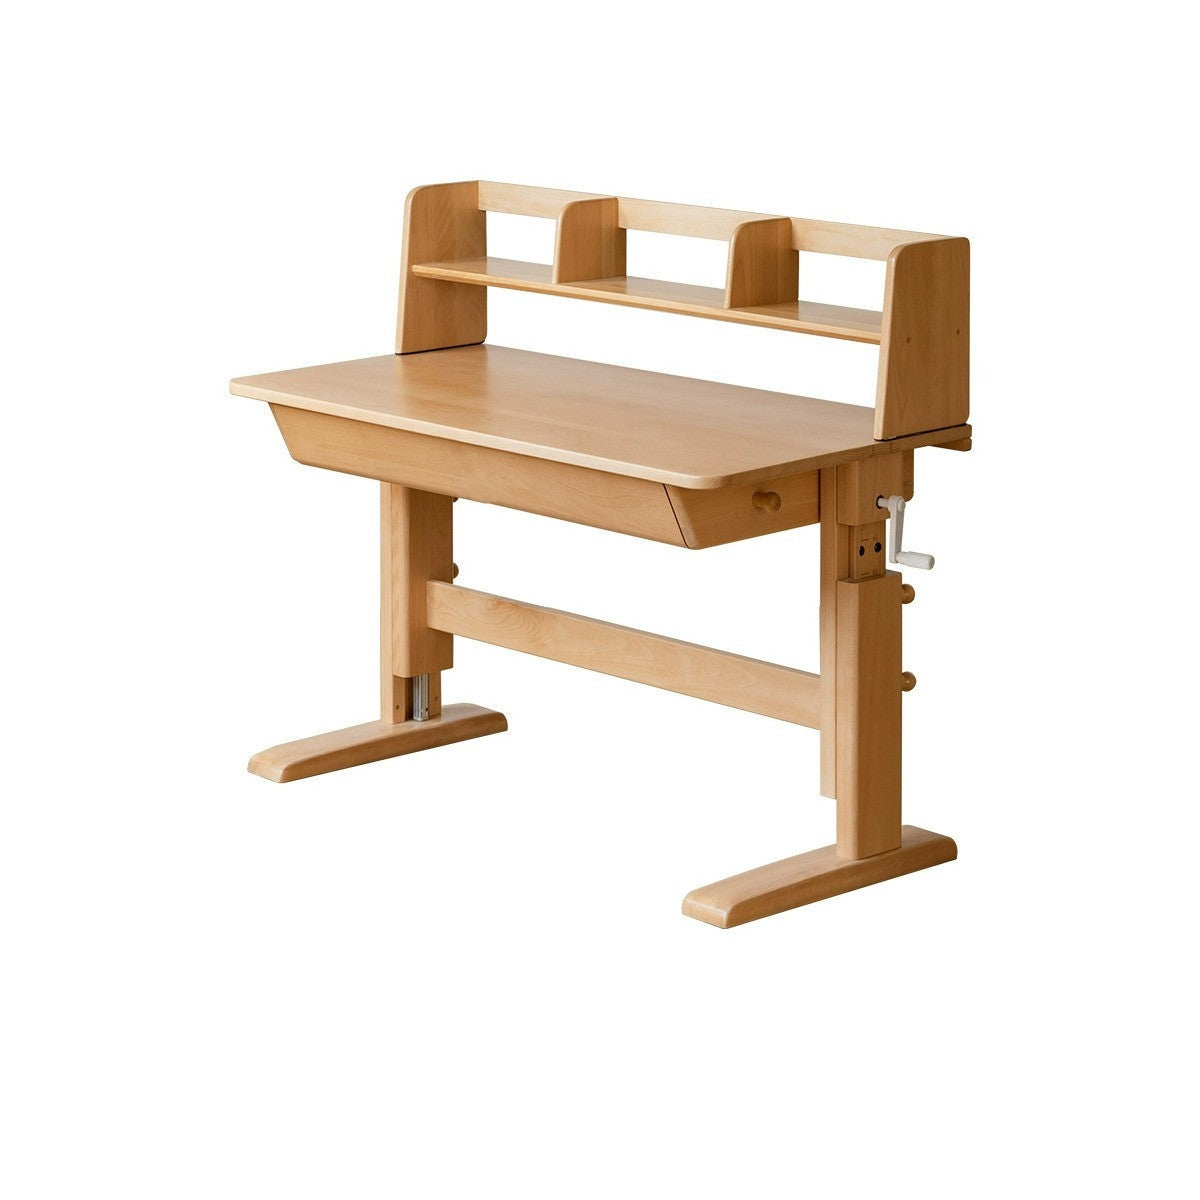 Beech Solid Wood lifting kids table with self/chair/high shelf-